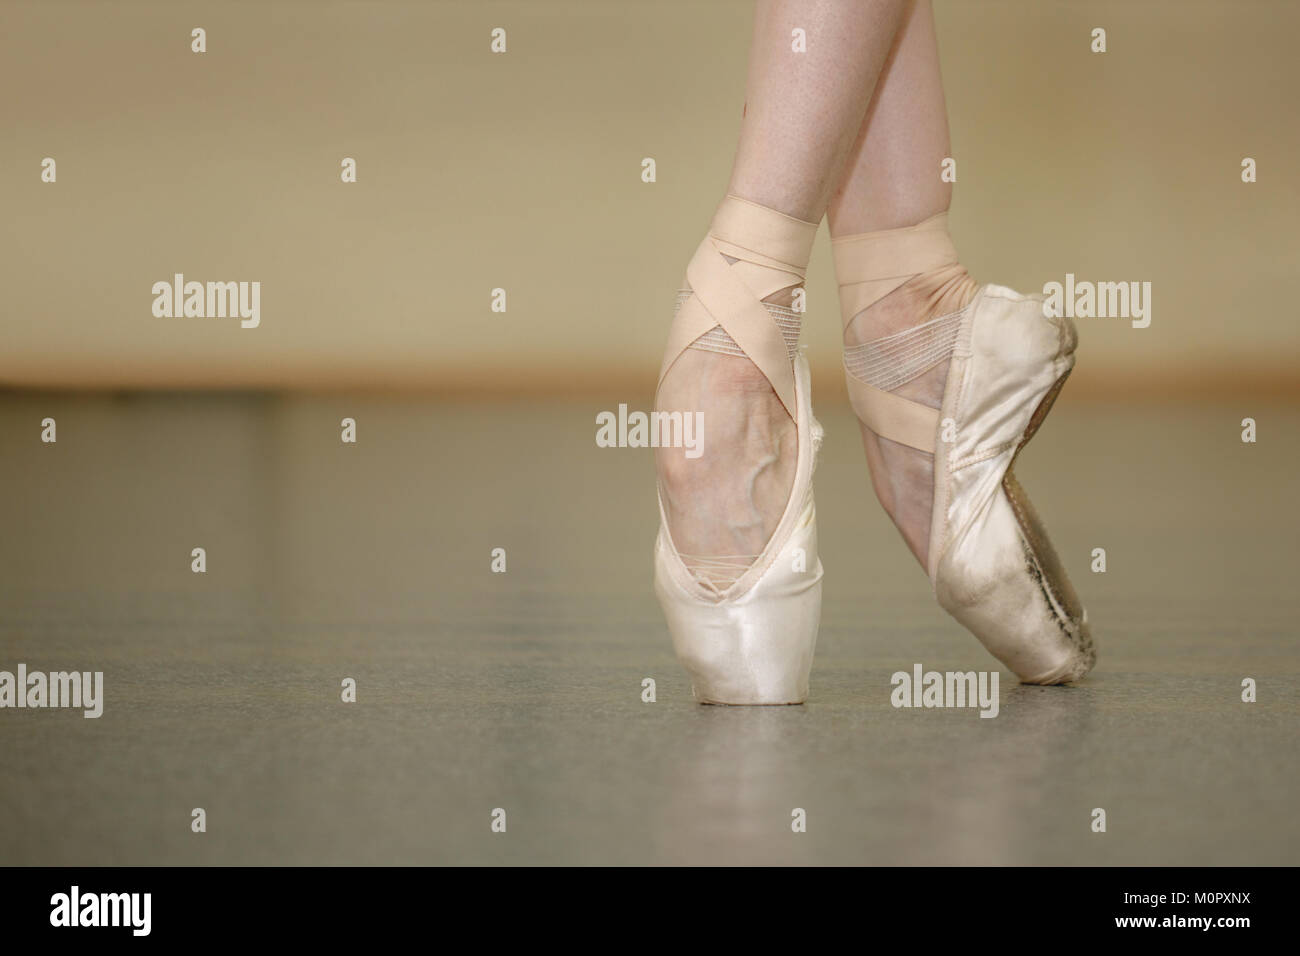 Slender ballerina feet in pointe shoes. Shooting close-ups Stock Photo